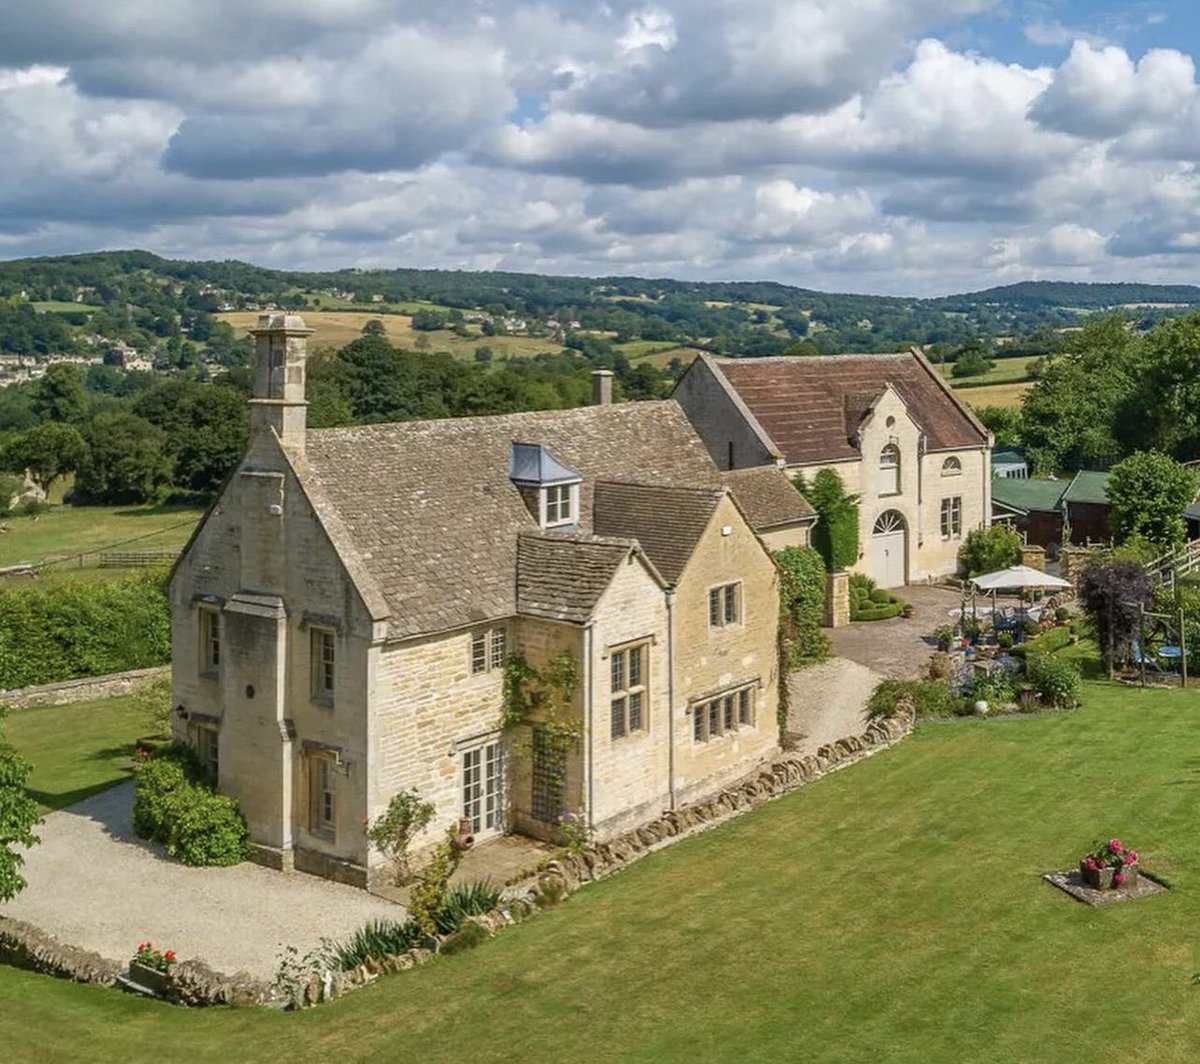 Old Greenhouse Farm, nestled on the edge of the picturesque Painswick Valley